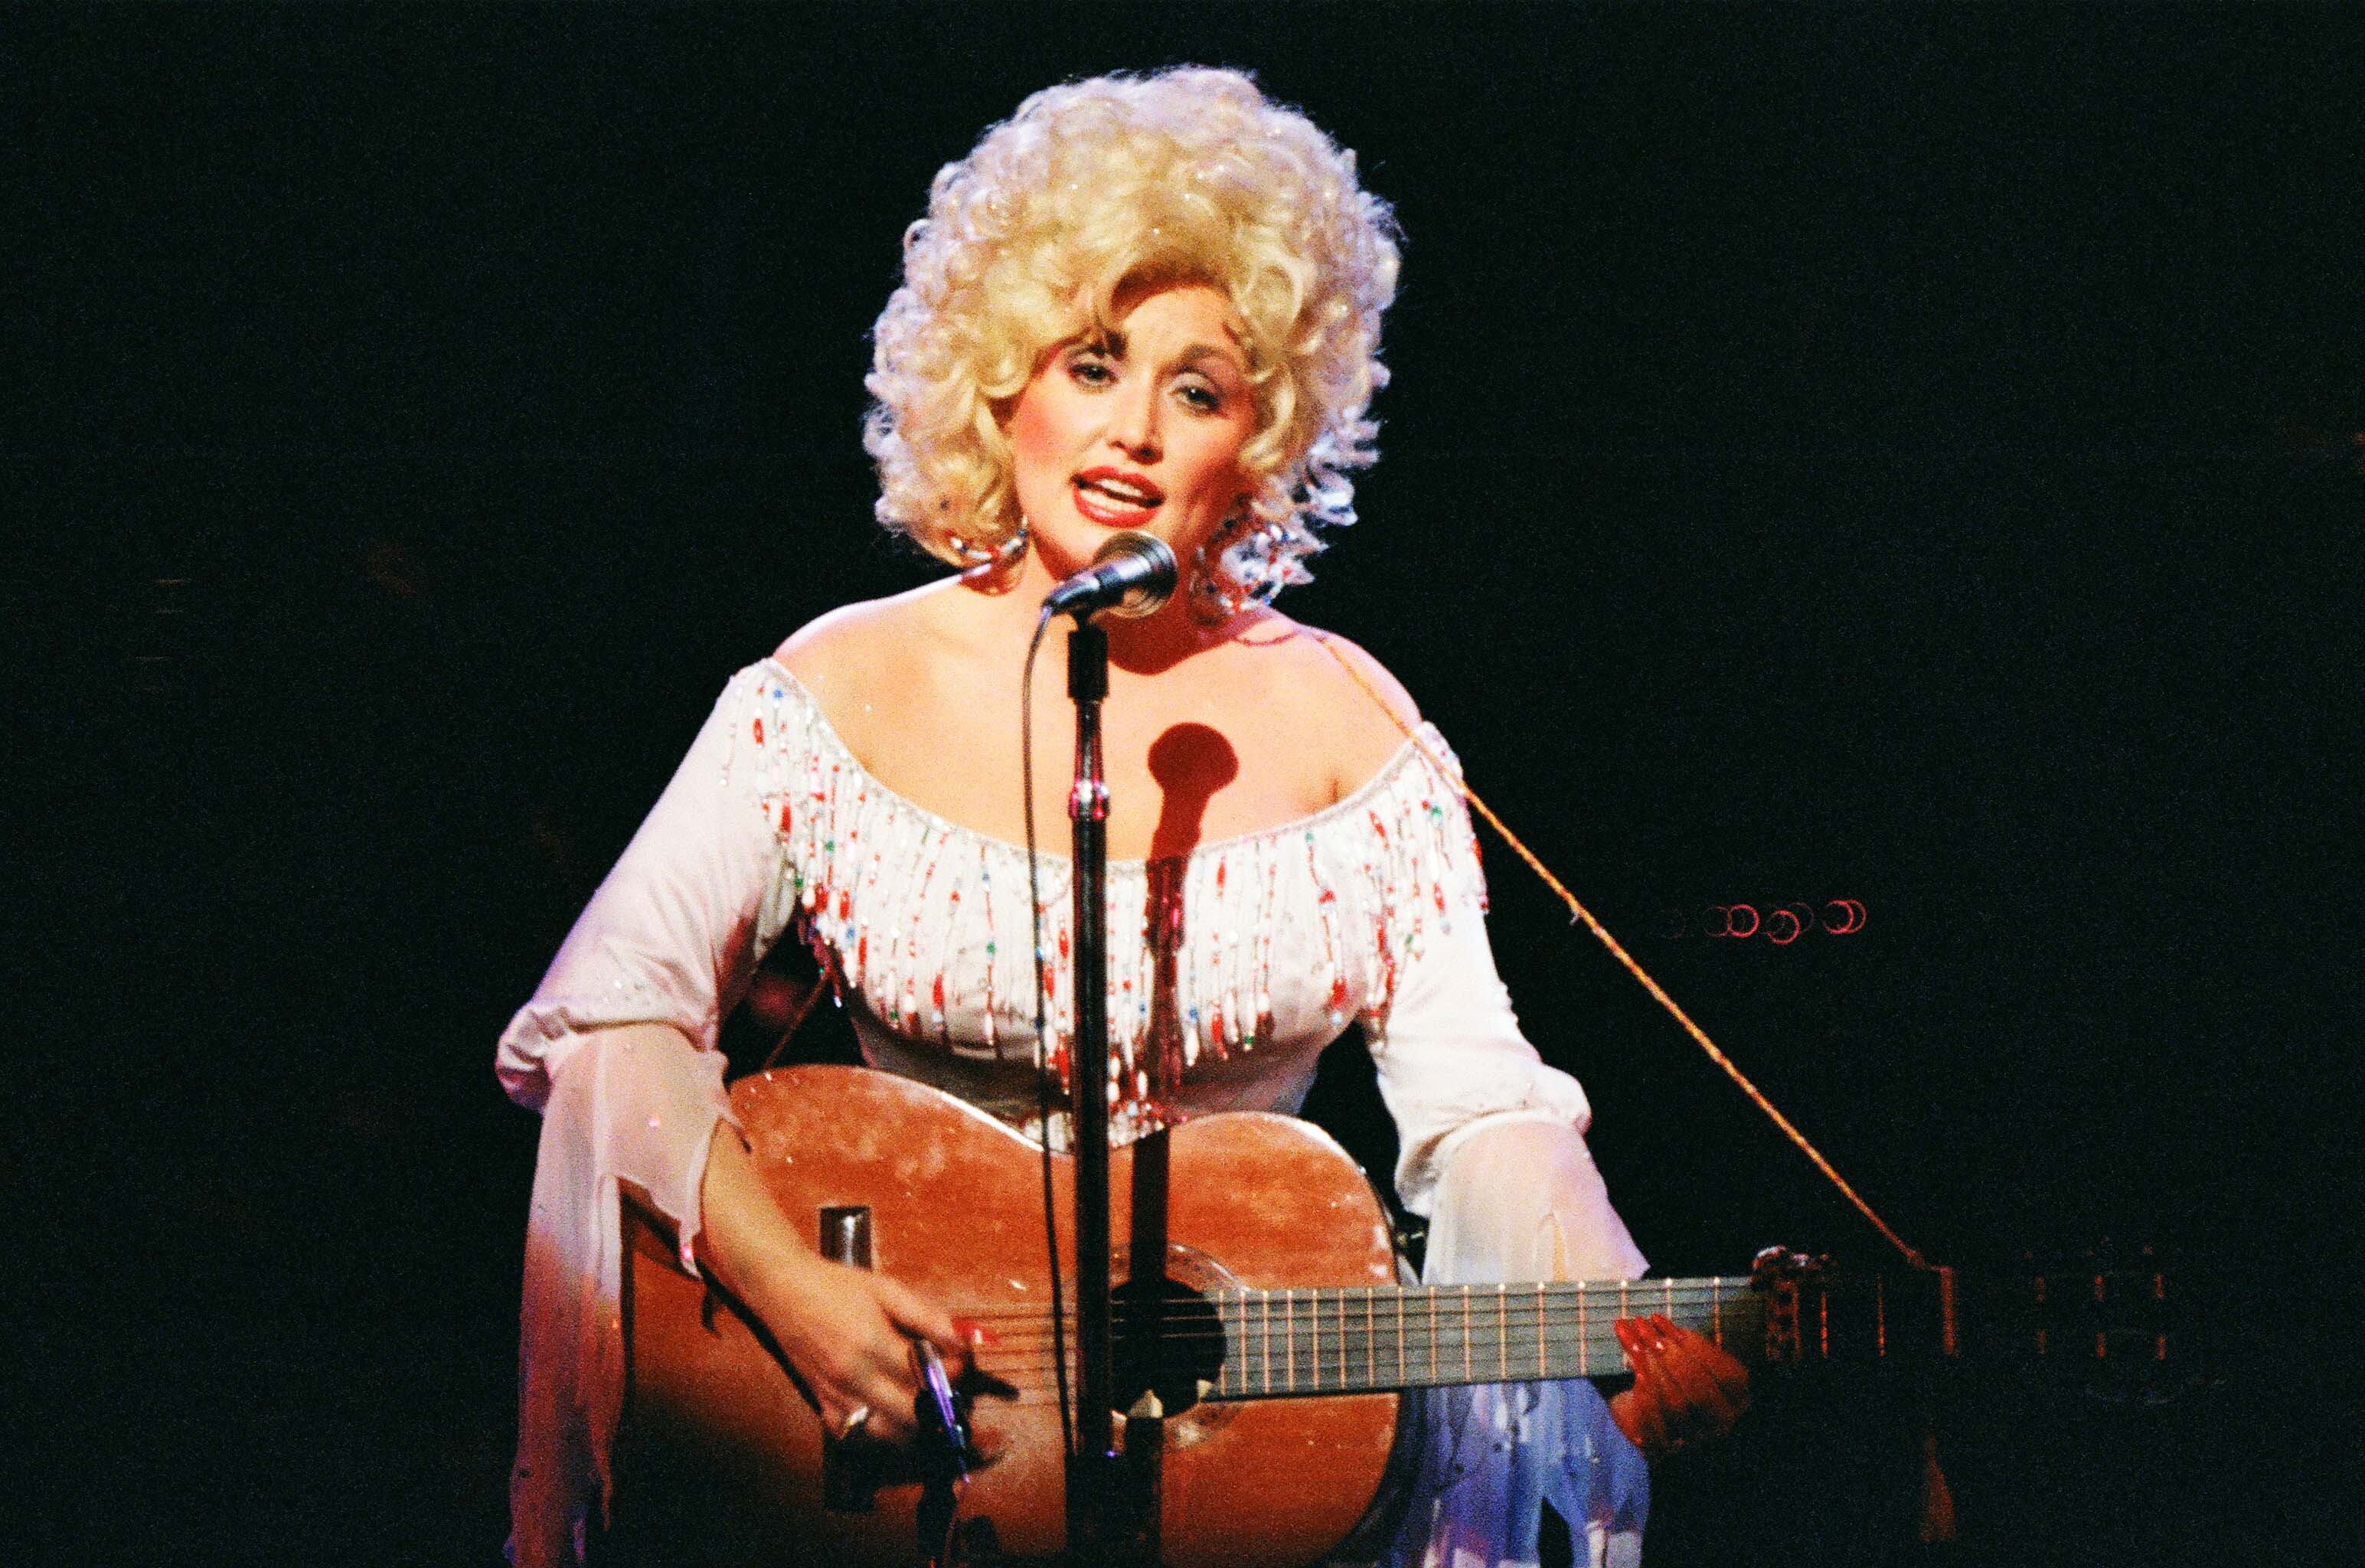 Dolly Parton Performs At The Dominion Theatre in London. She's playing the guitar and singing into a microphone.